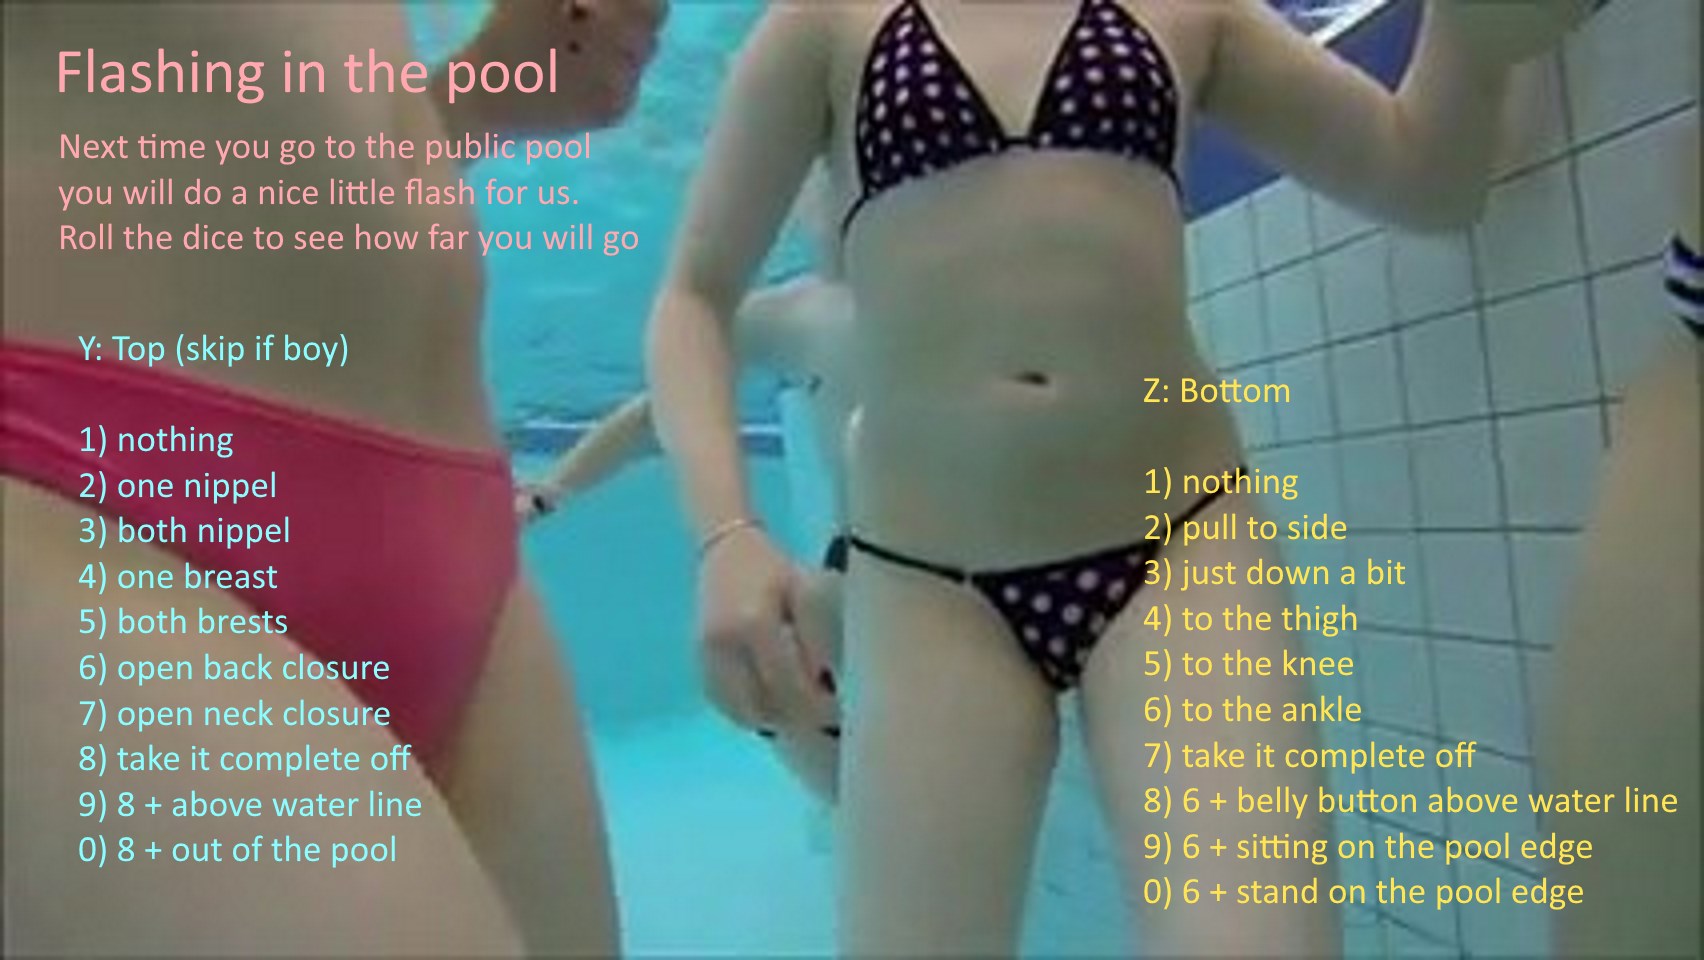 Pool flash fan pictures